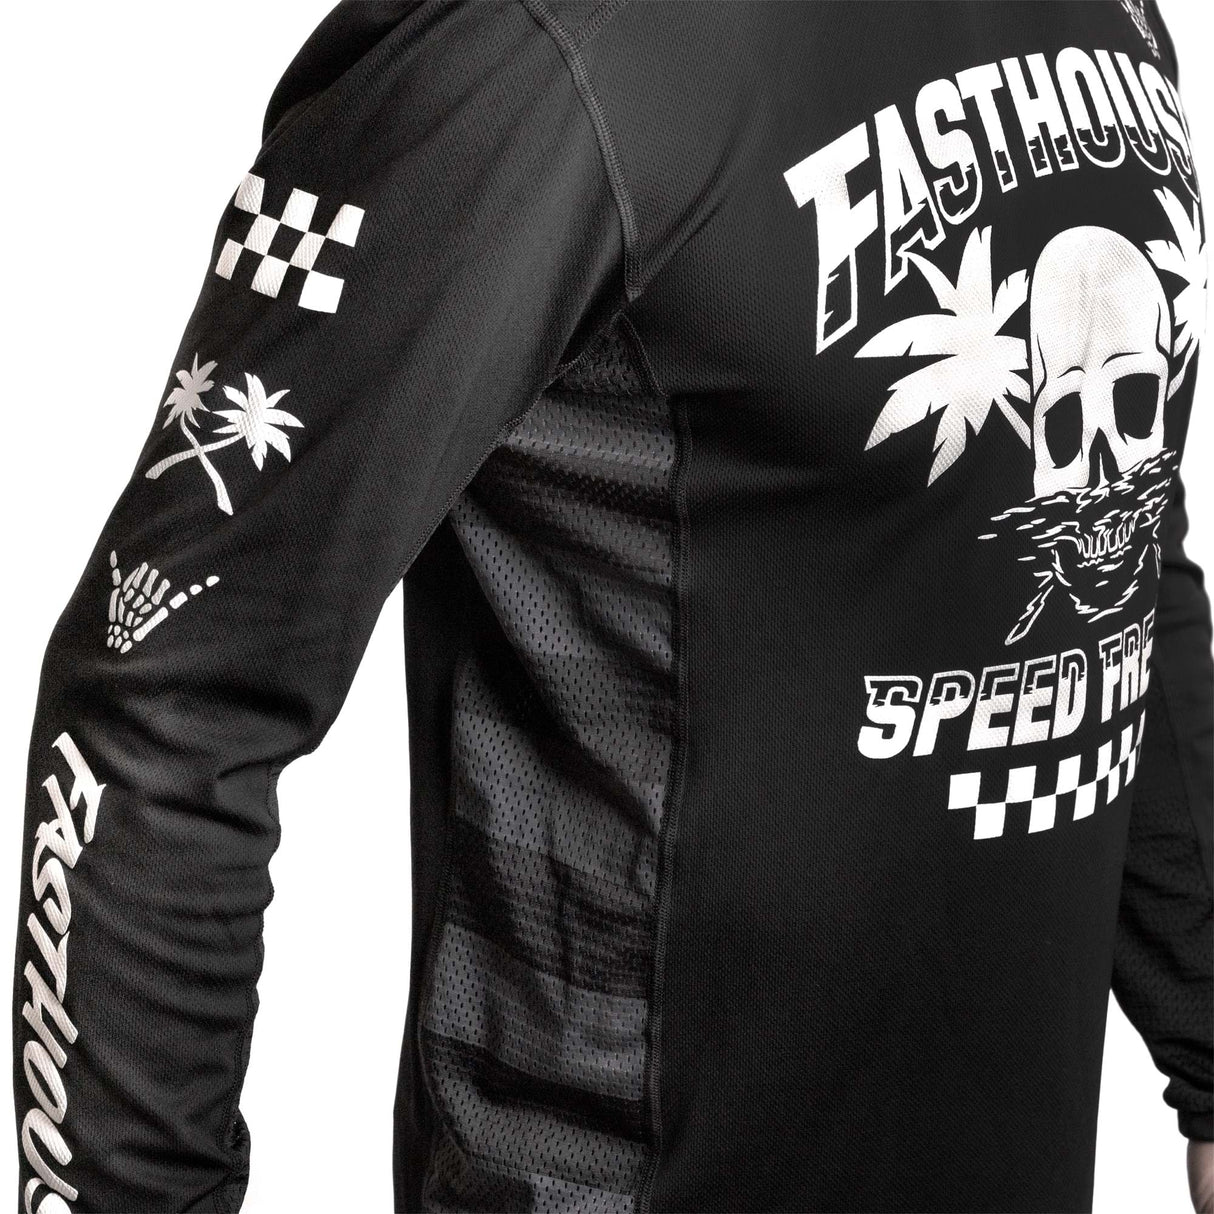 Fasthouse USA Grindhouse Subside Long Sleeve Jersey